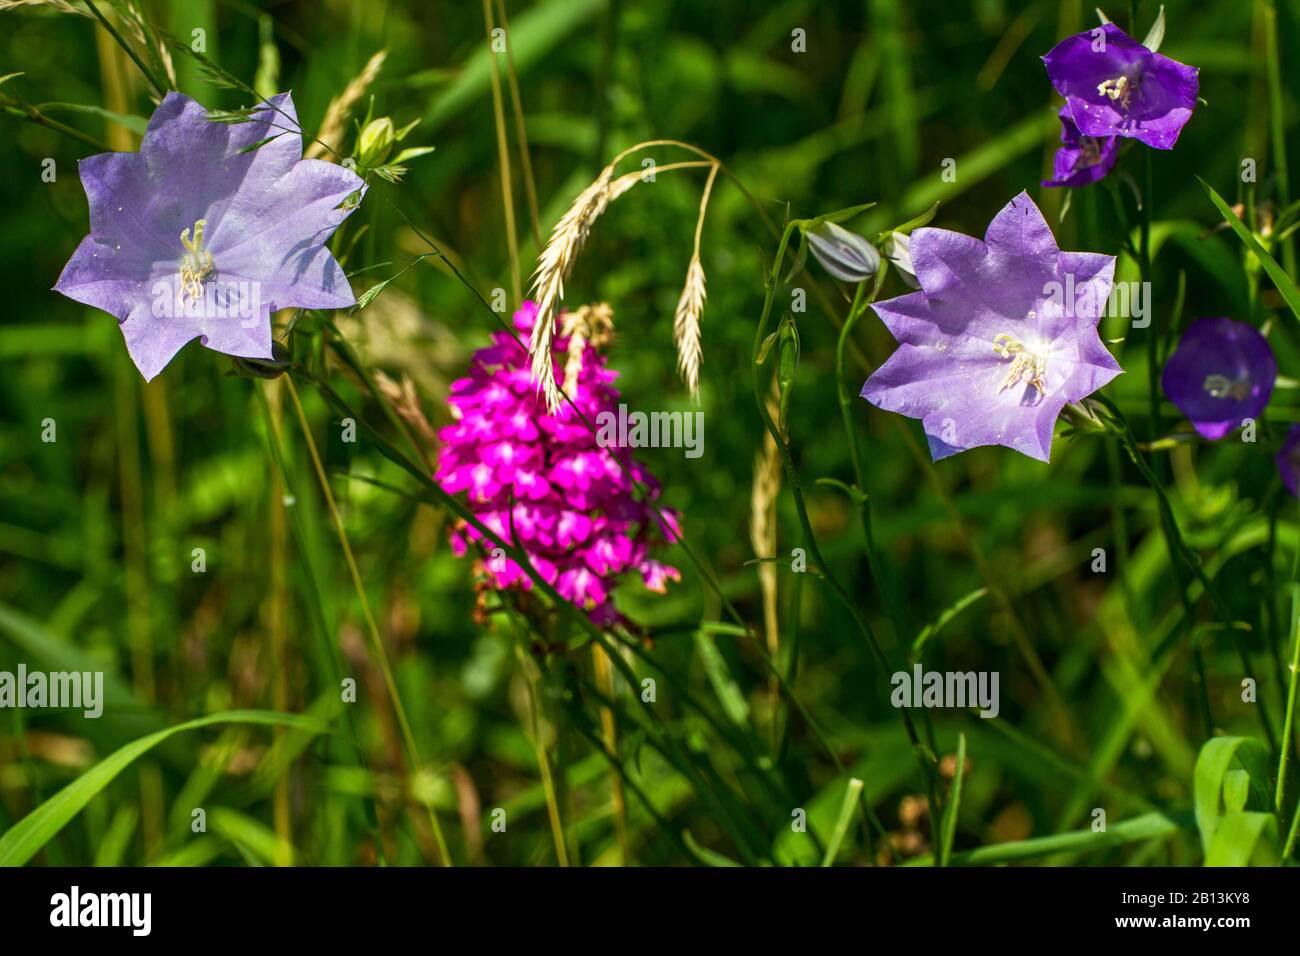 peach-leaved bellflower (Campanula persicifolia), with unnormal flower lobes, Pyramidal orchid in the background, Germany, Baden-Wuerttemberg Stock Photo